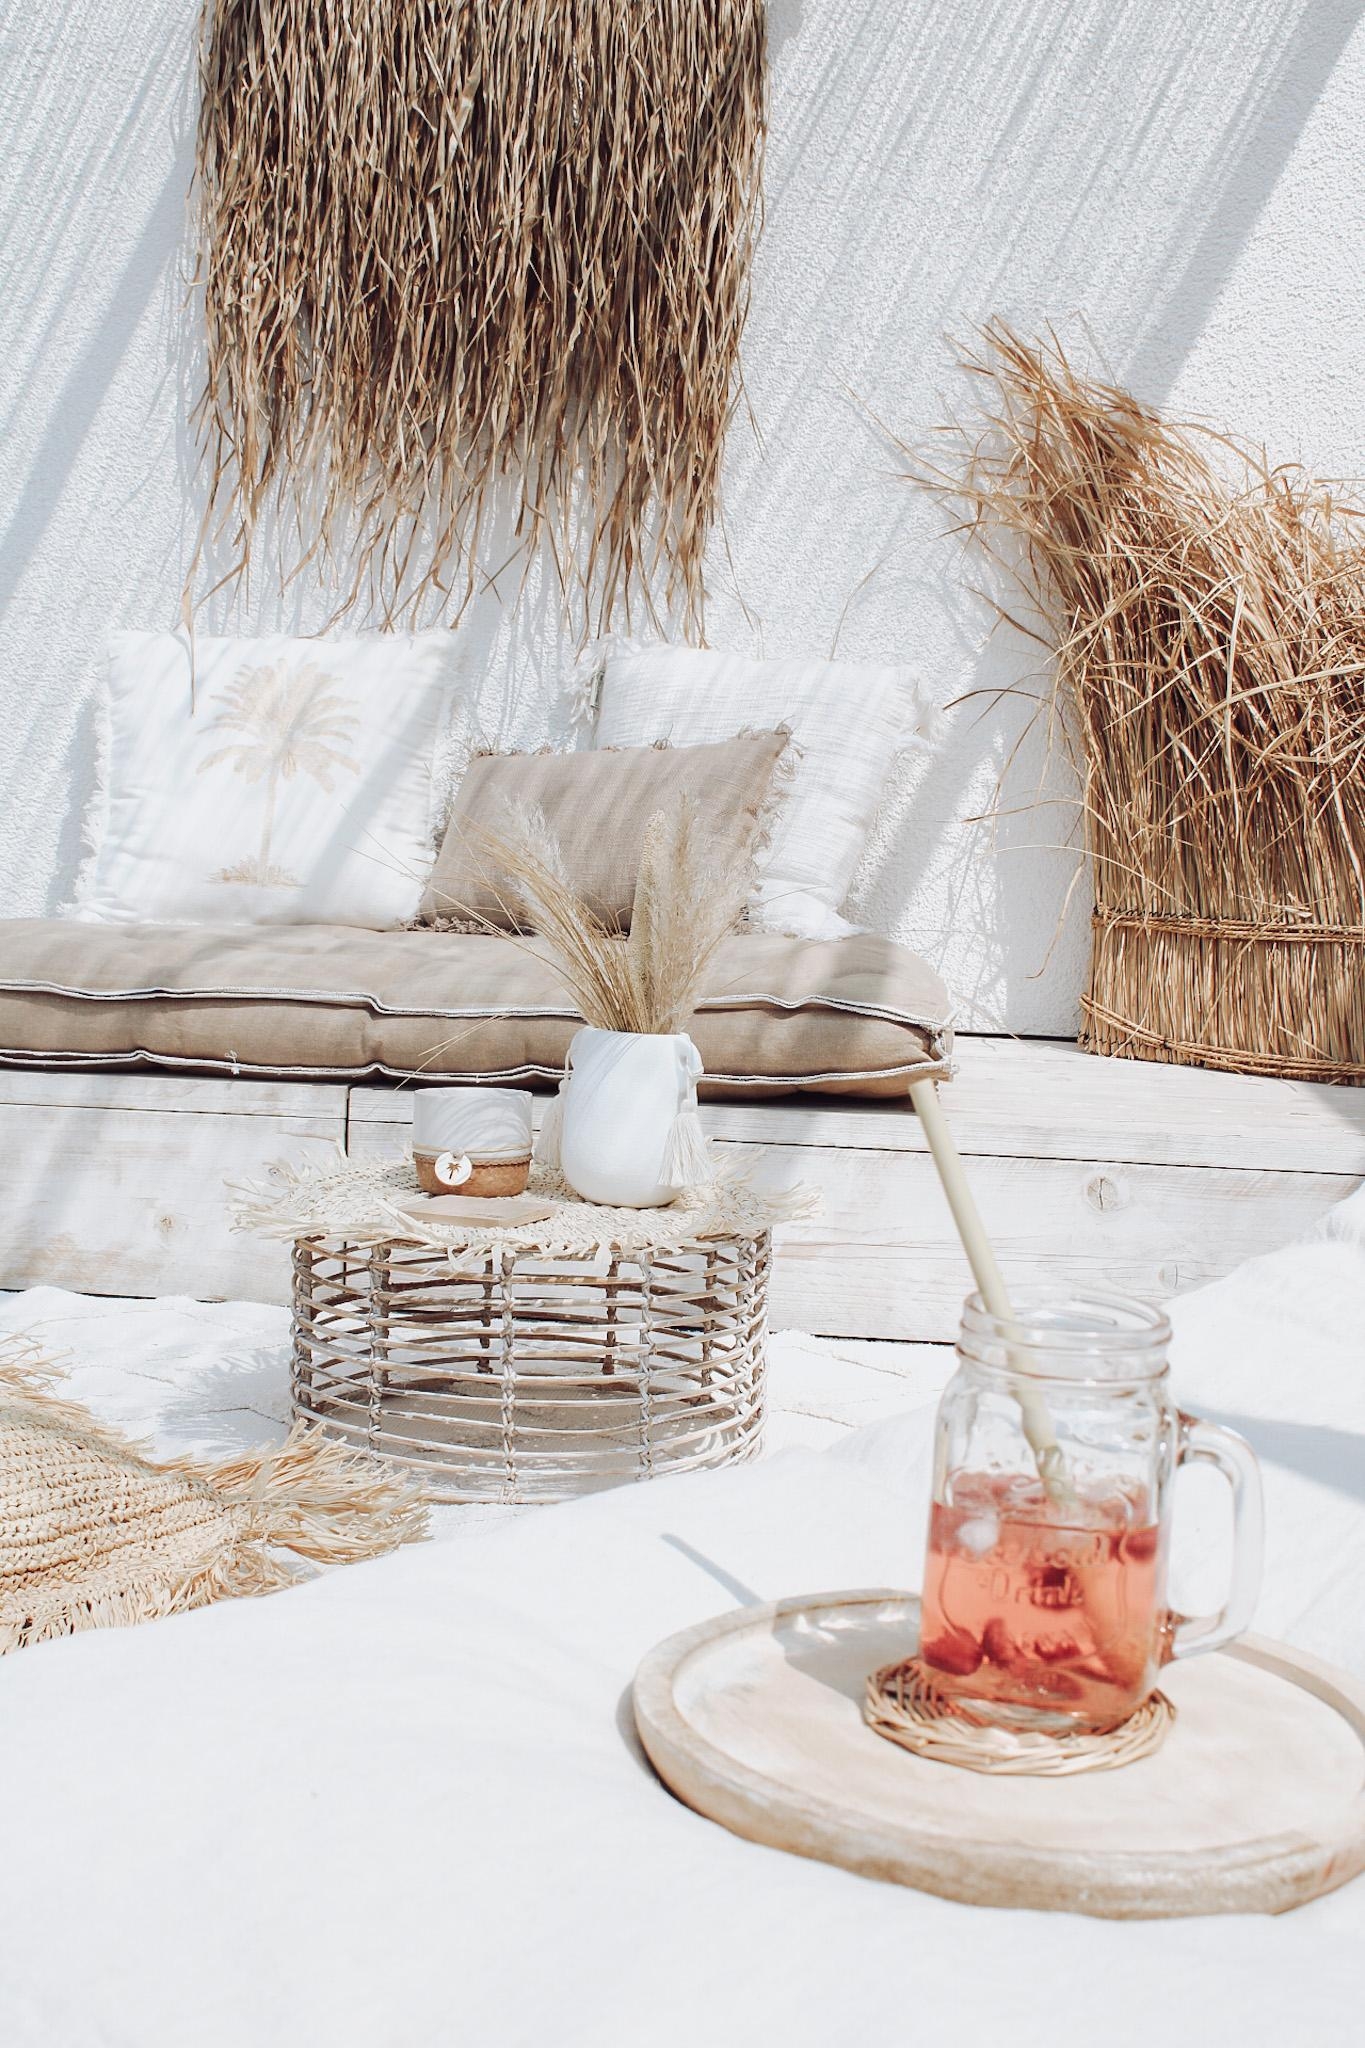 Natural Boho Home

Be ready for sunny days 

#couchstyle #bohostyle #summerisland #naturalaccessoires 